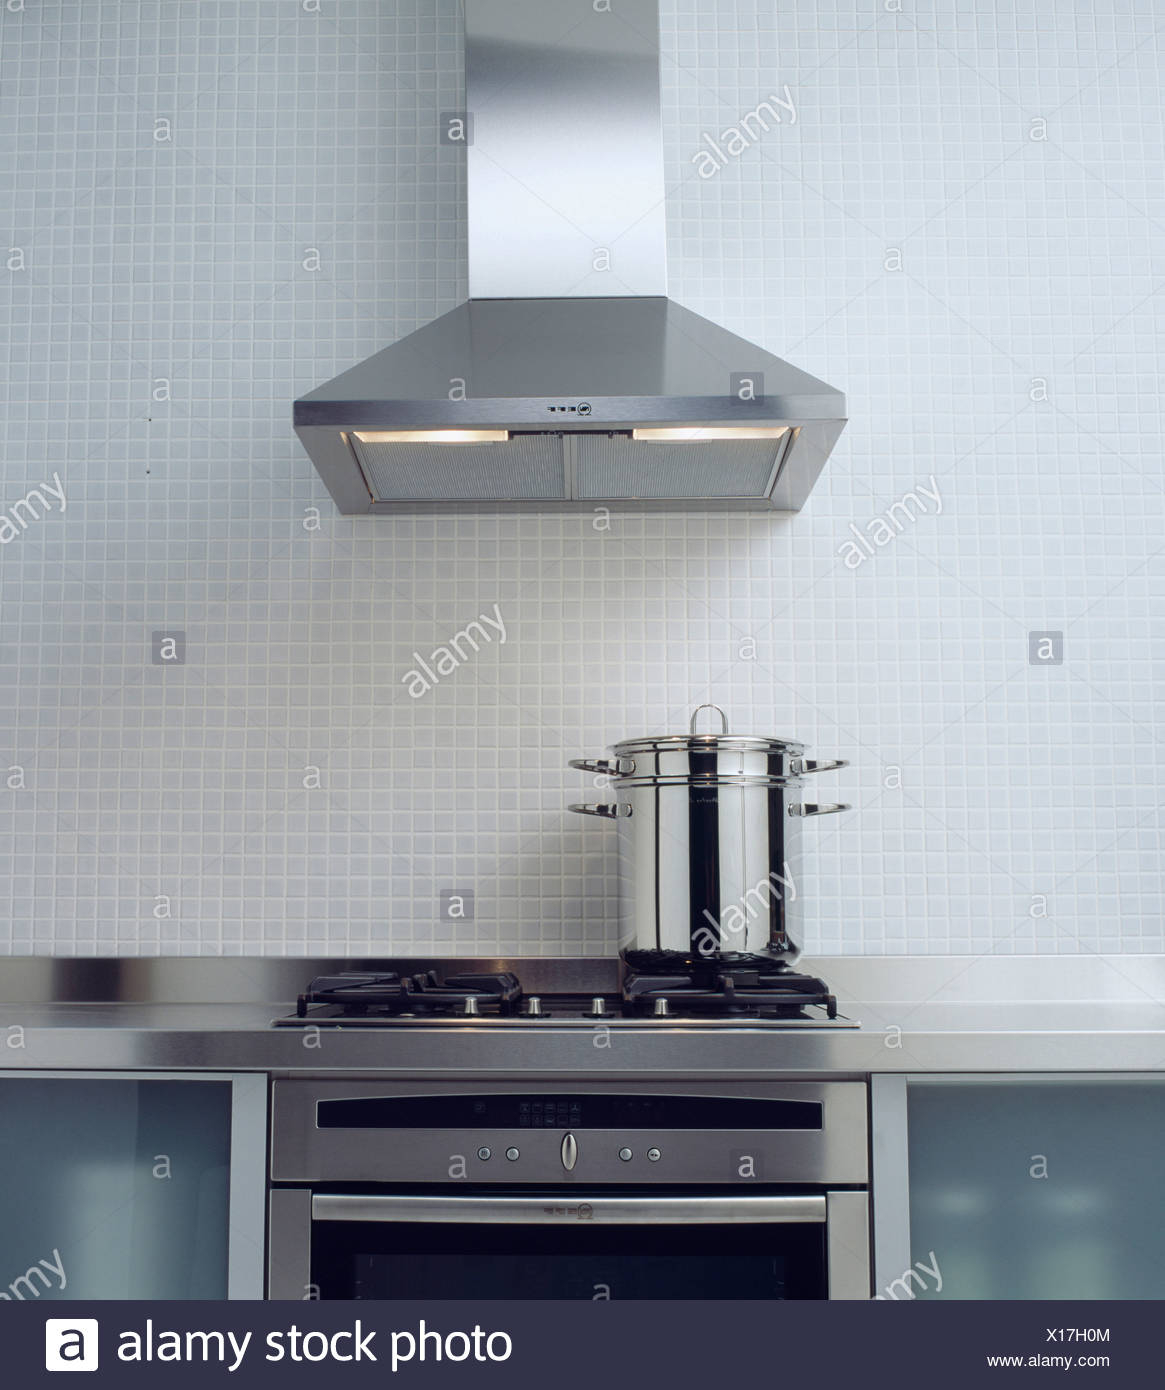 Stainless Steel Extractor Fan Above Pan On Hob In Modern regarding sizing 1165 X 1390